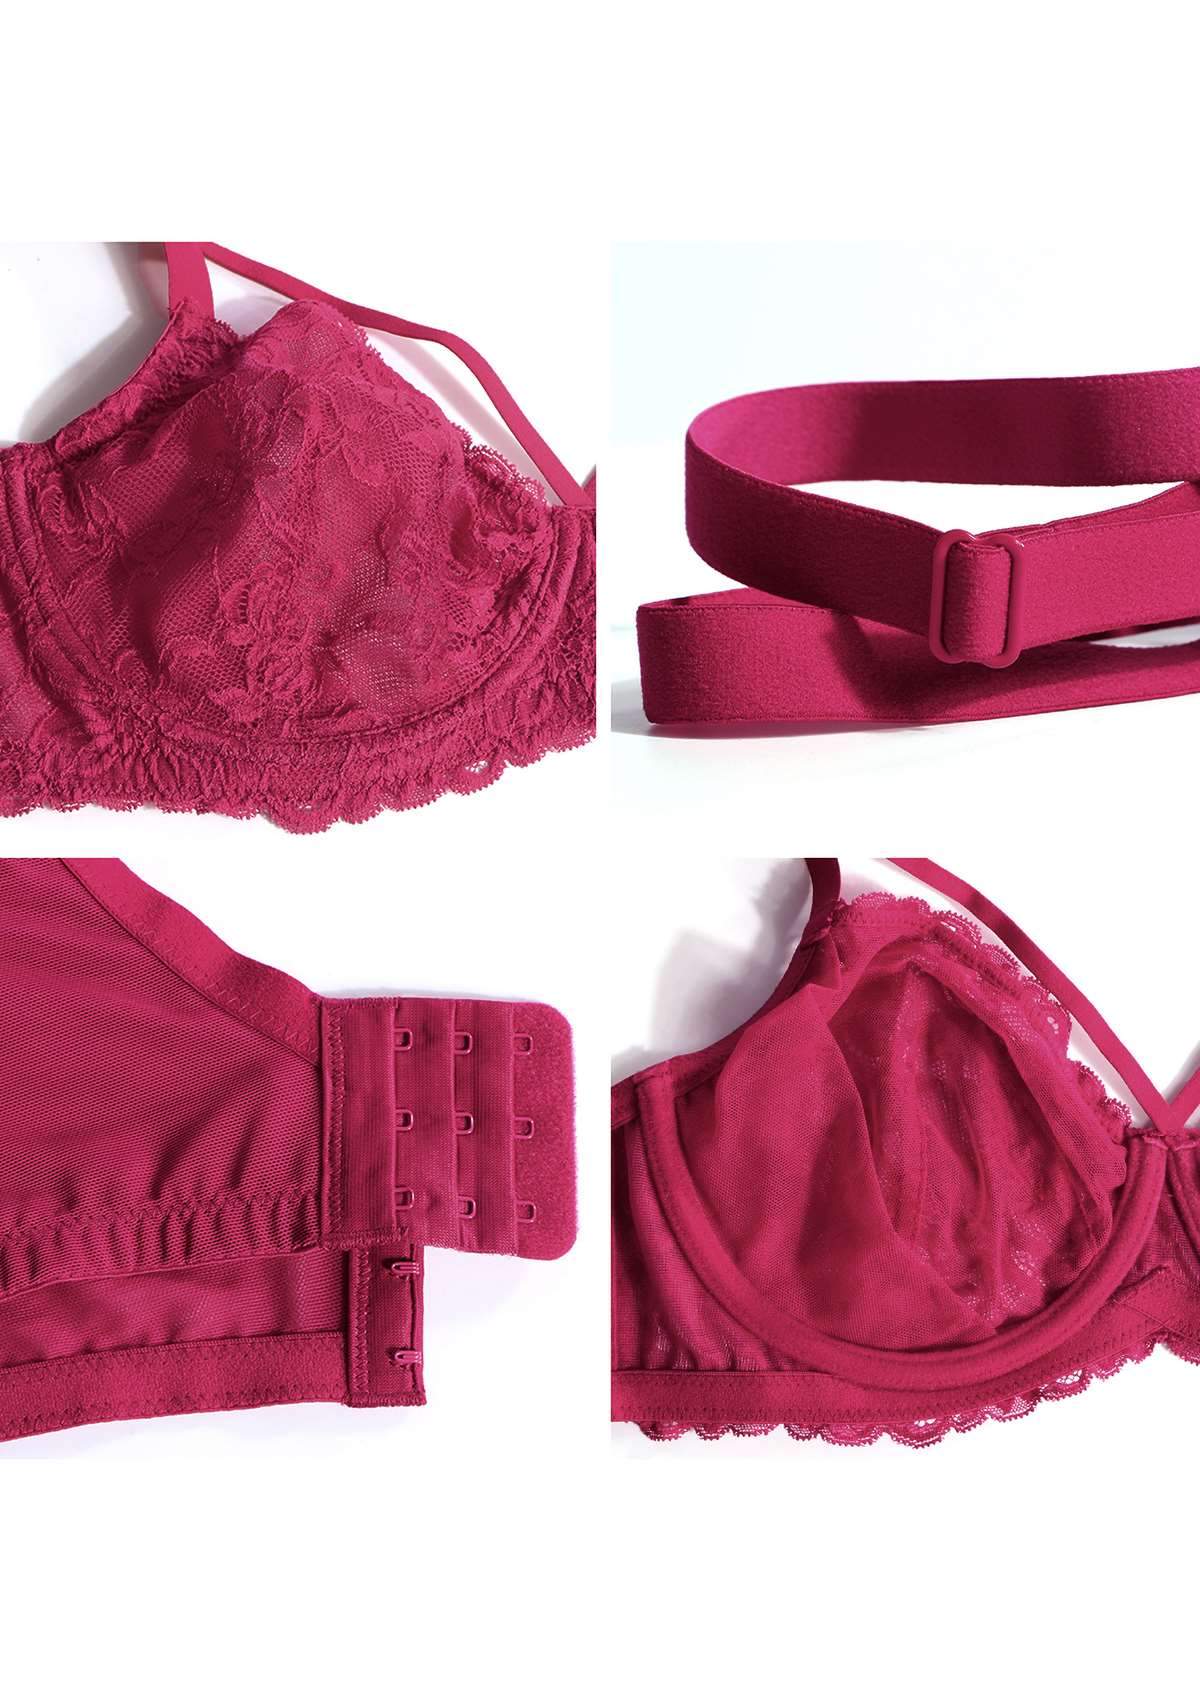 HSIA Pretty In Petals Sexy Lace Bra: Full Coverage Back Smoothing Bra - Red / 44 / DDD/F